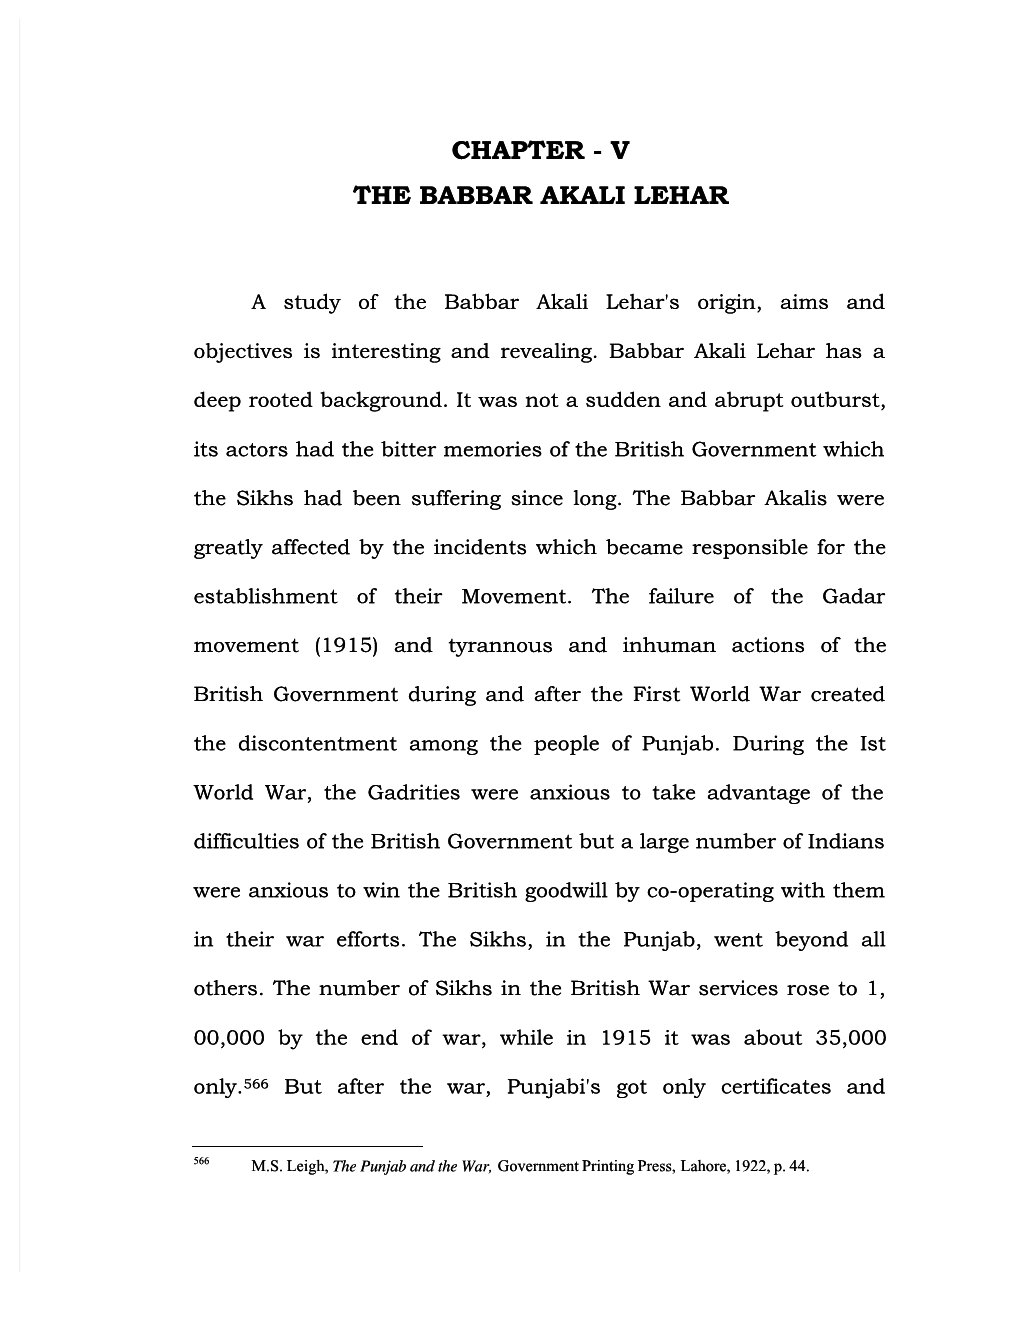 A Study of the Babbar Akali Lehar's Origin, Aims and Objectives Is Interesting and Revealing. Babbar Akali Lehar Has a Deep Rooted Background